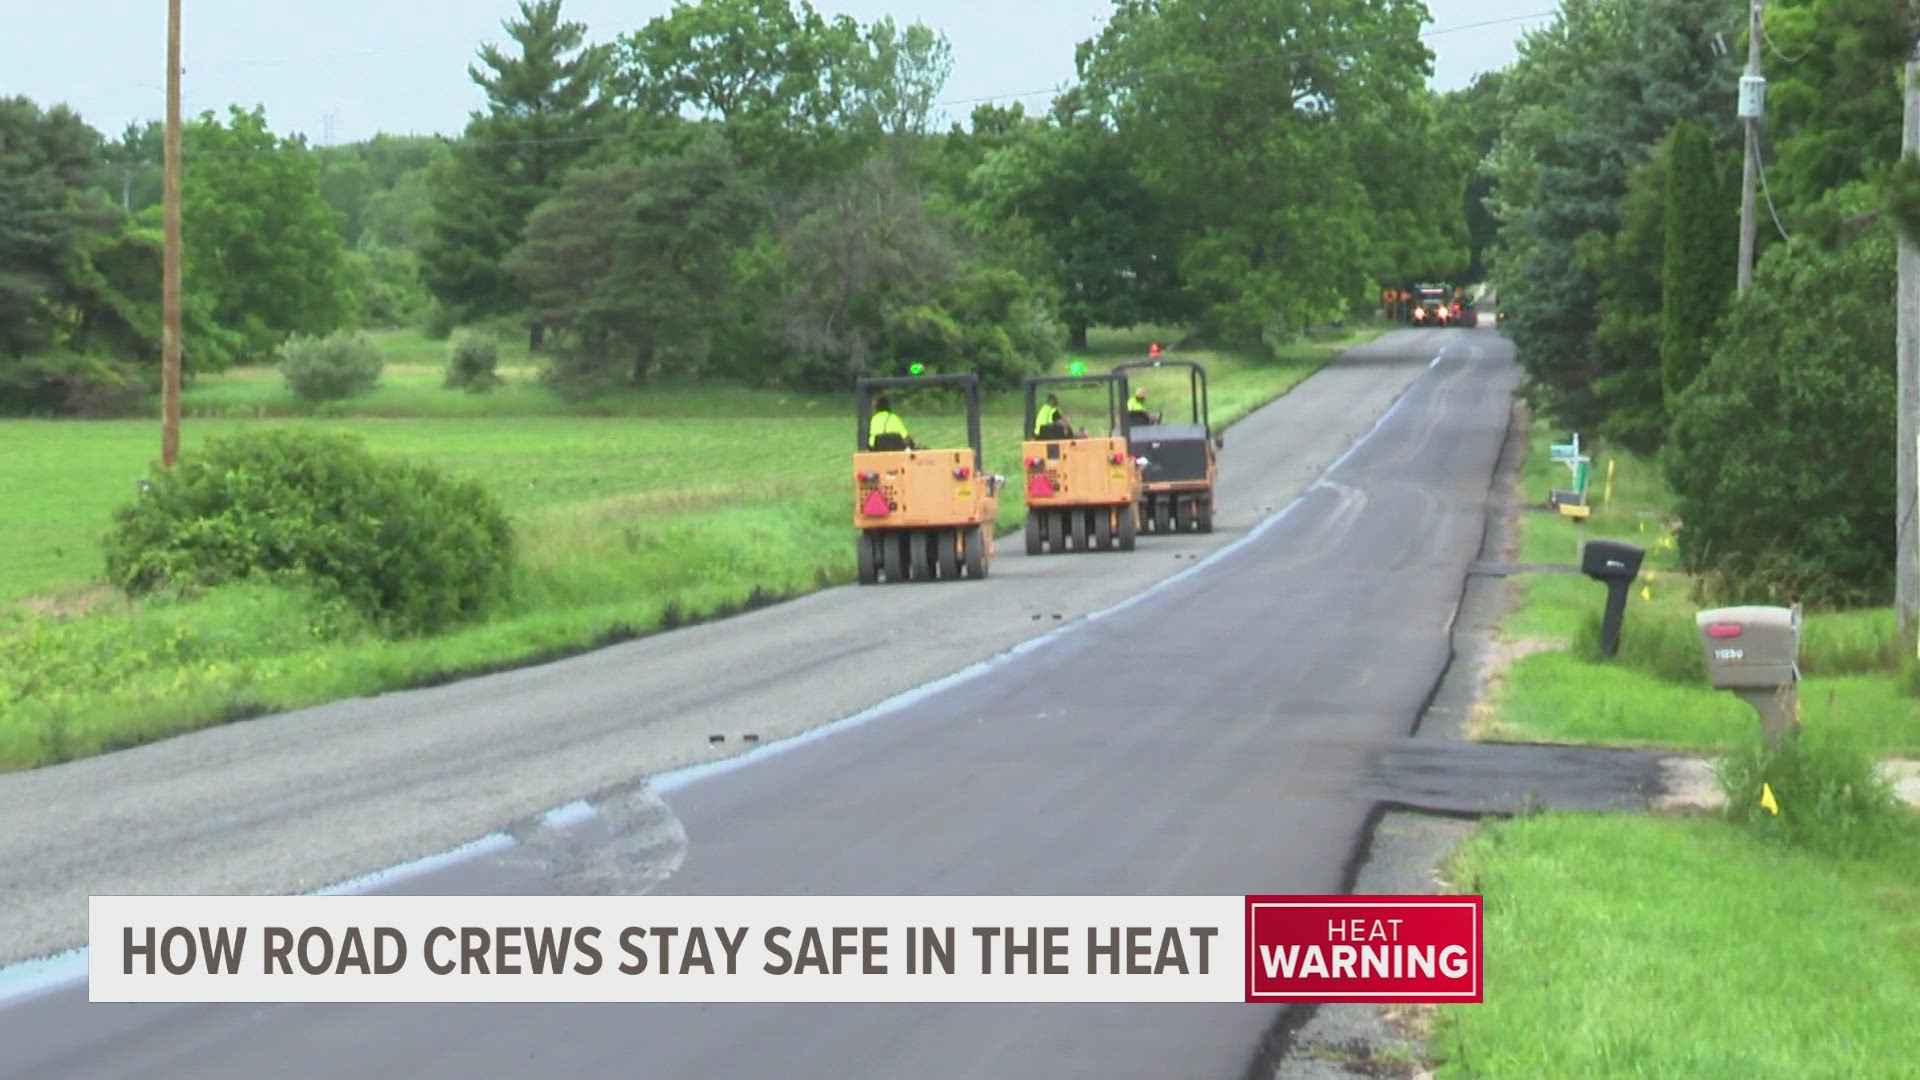 13 ON YOUR SIDE's Lauren Baker explains how road crews stay safe and cool even on the hottest days.